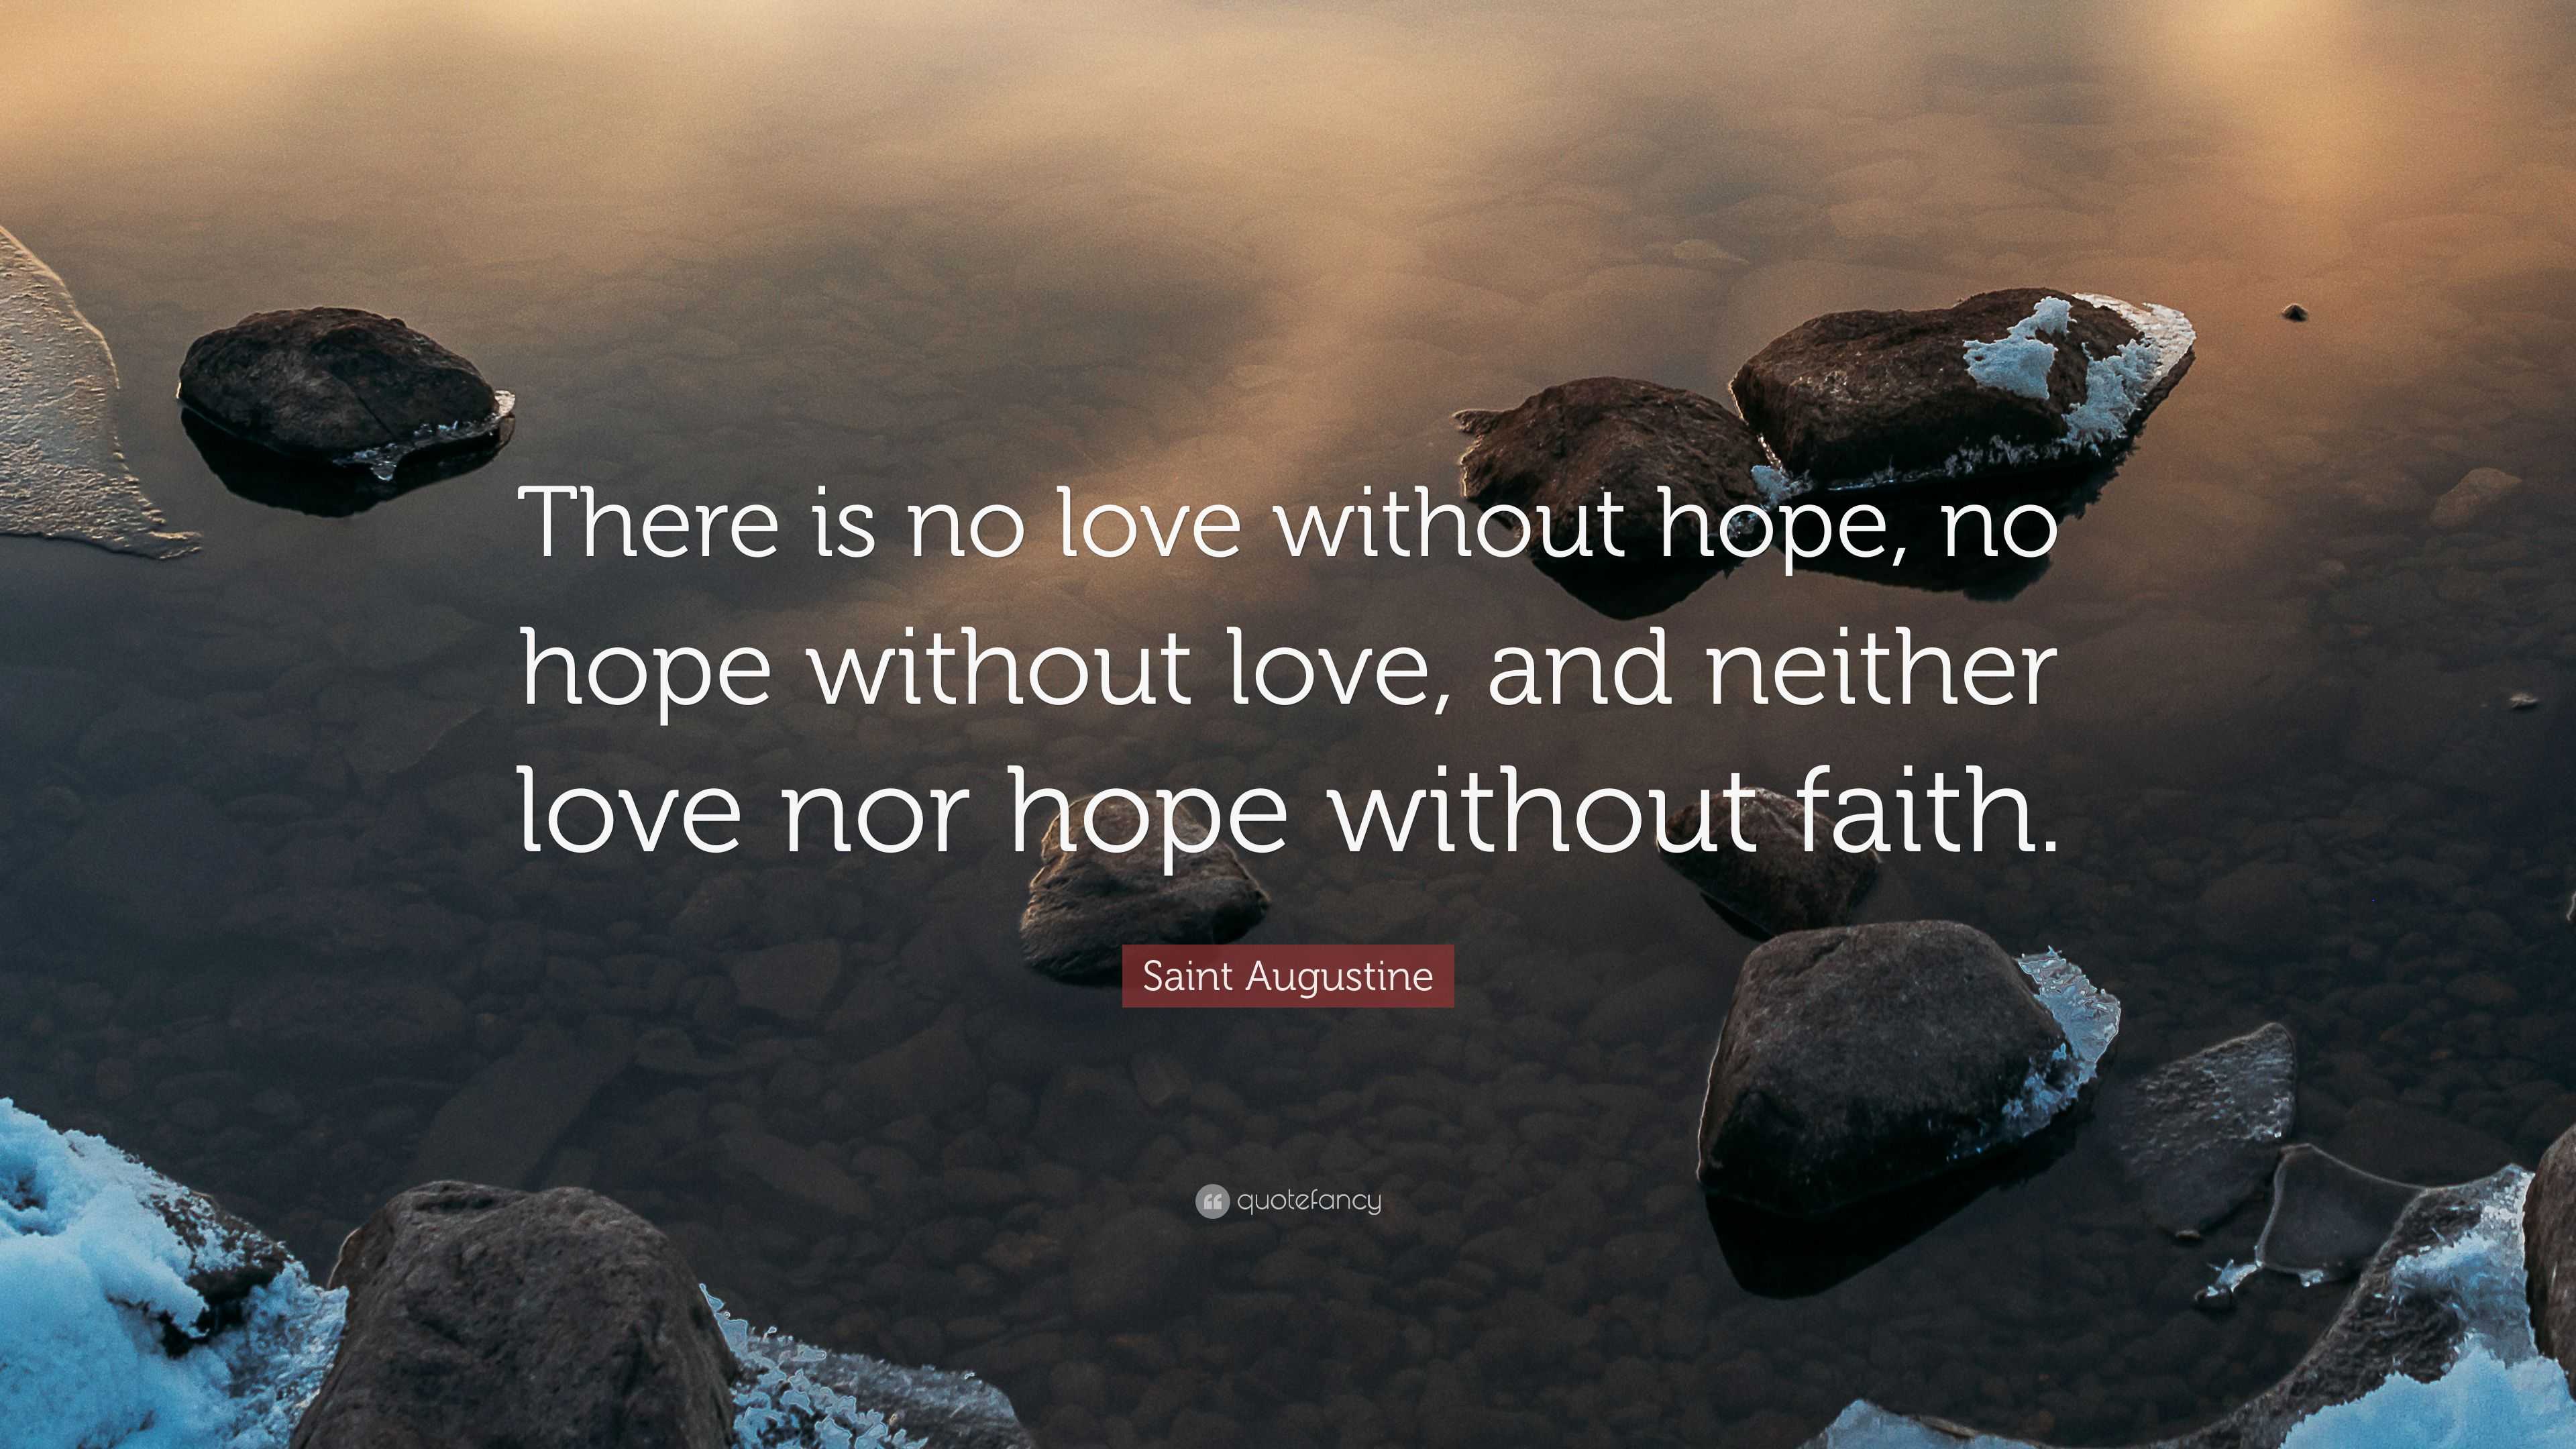 Saint Augustine Quote: “There Is No Love Without Hope, No Hope Without Love, And Neither Love